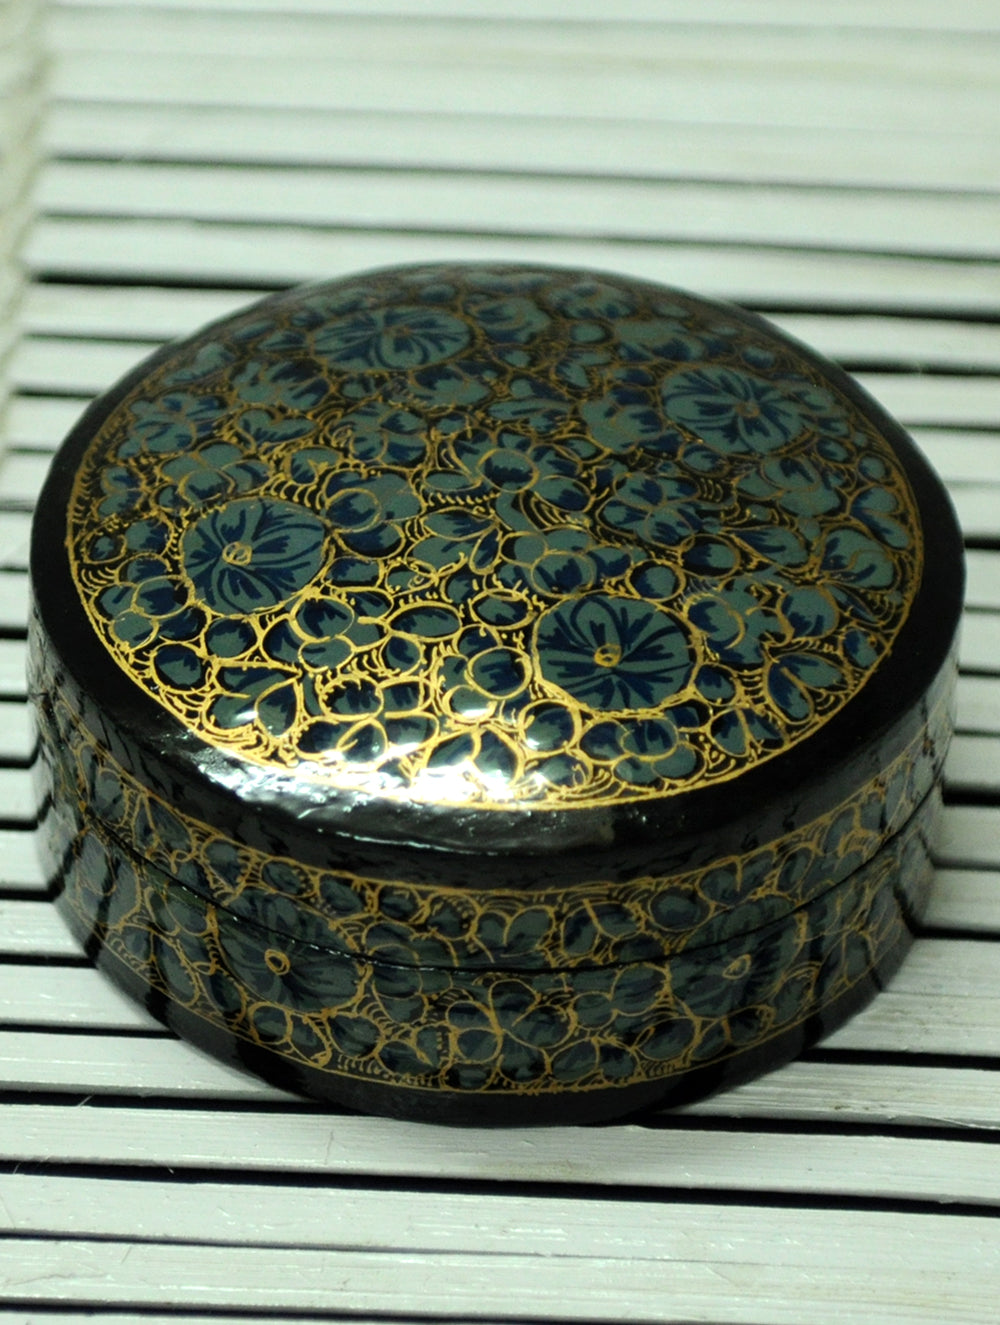 Load image into Gallery viewer, Kashmiri Art Papier Mache - Round Box, Small, Multicoloured - The India Craft House 